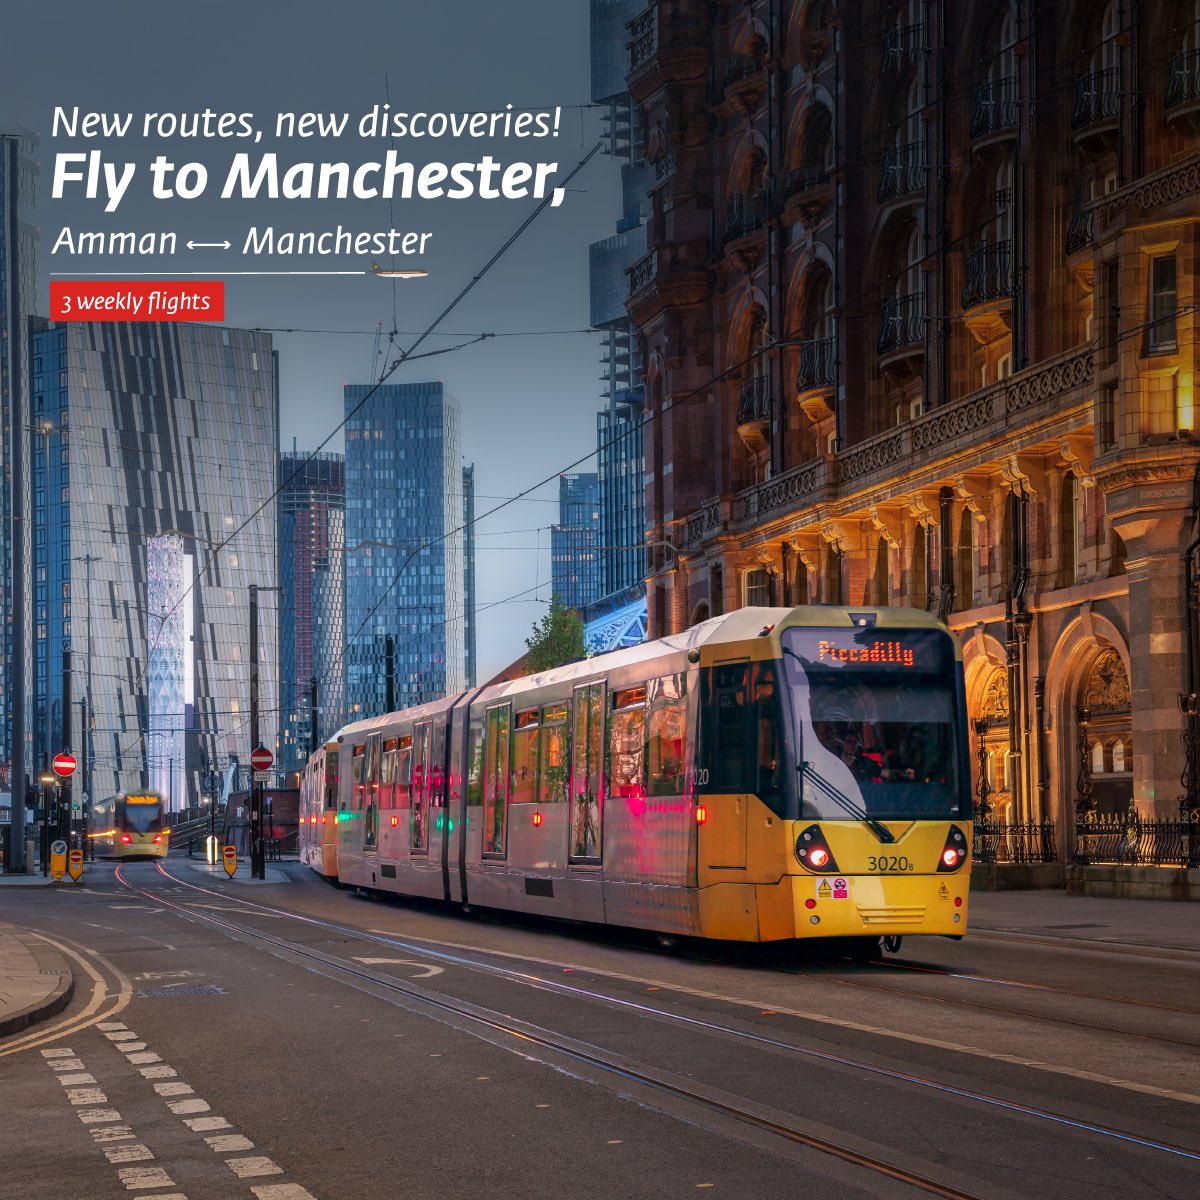 Discover new horizons with Manchester, your latest gateway to the UK. We'll be operating three weekly flights launching in March 2024. Book your flight now through rj.com #RoyalJordanian #RJ  #WeFlyTogether